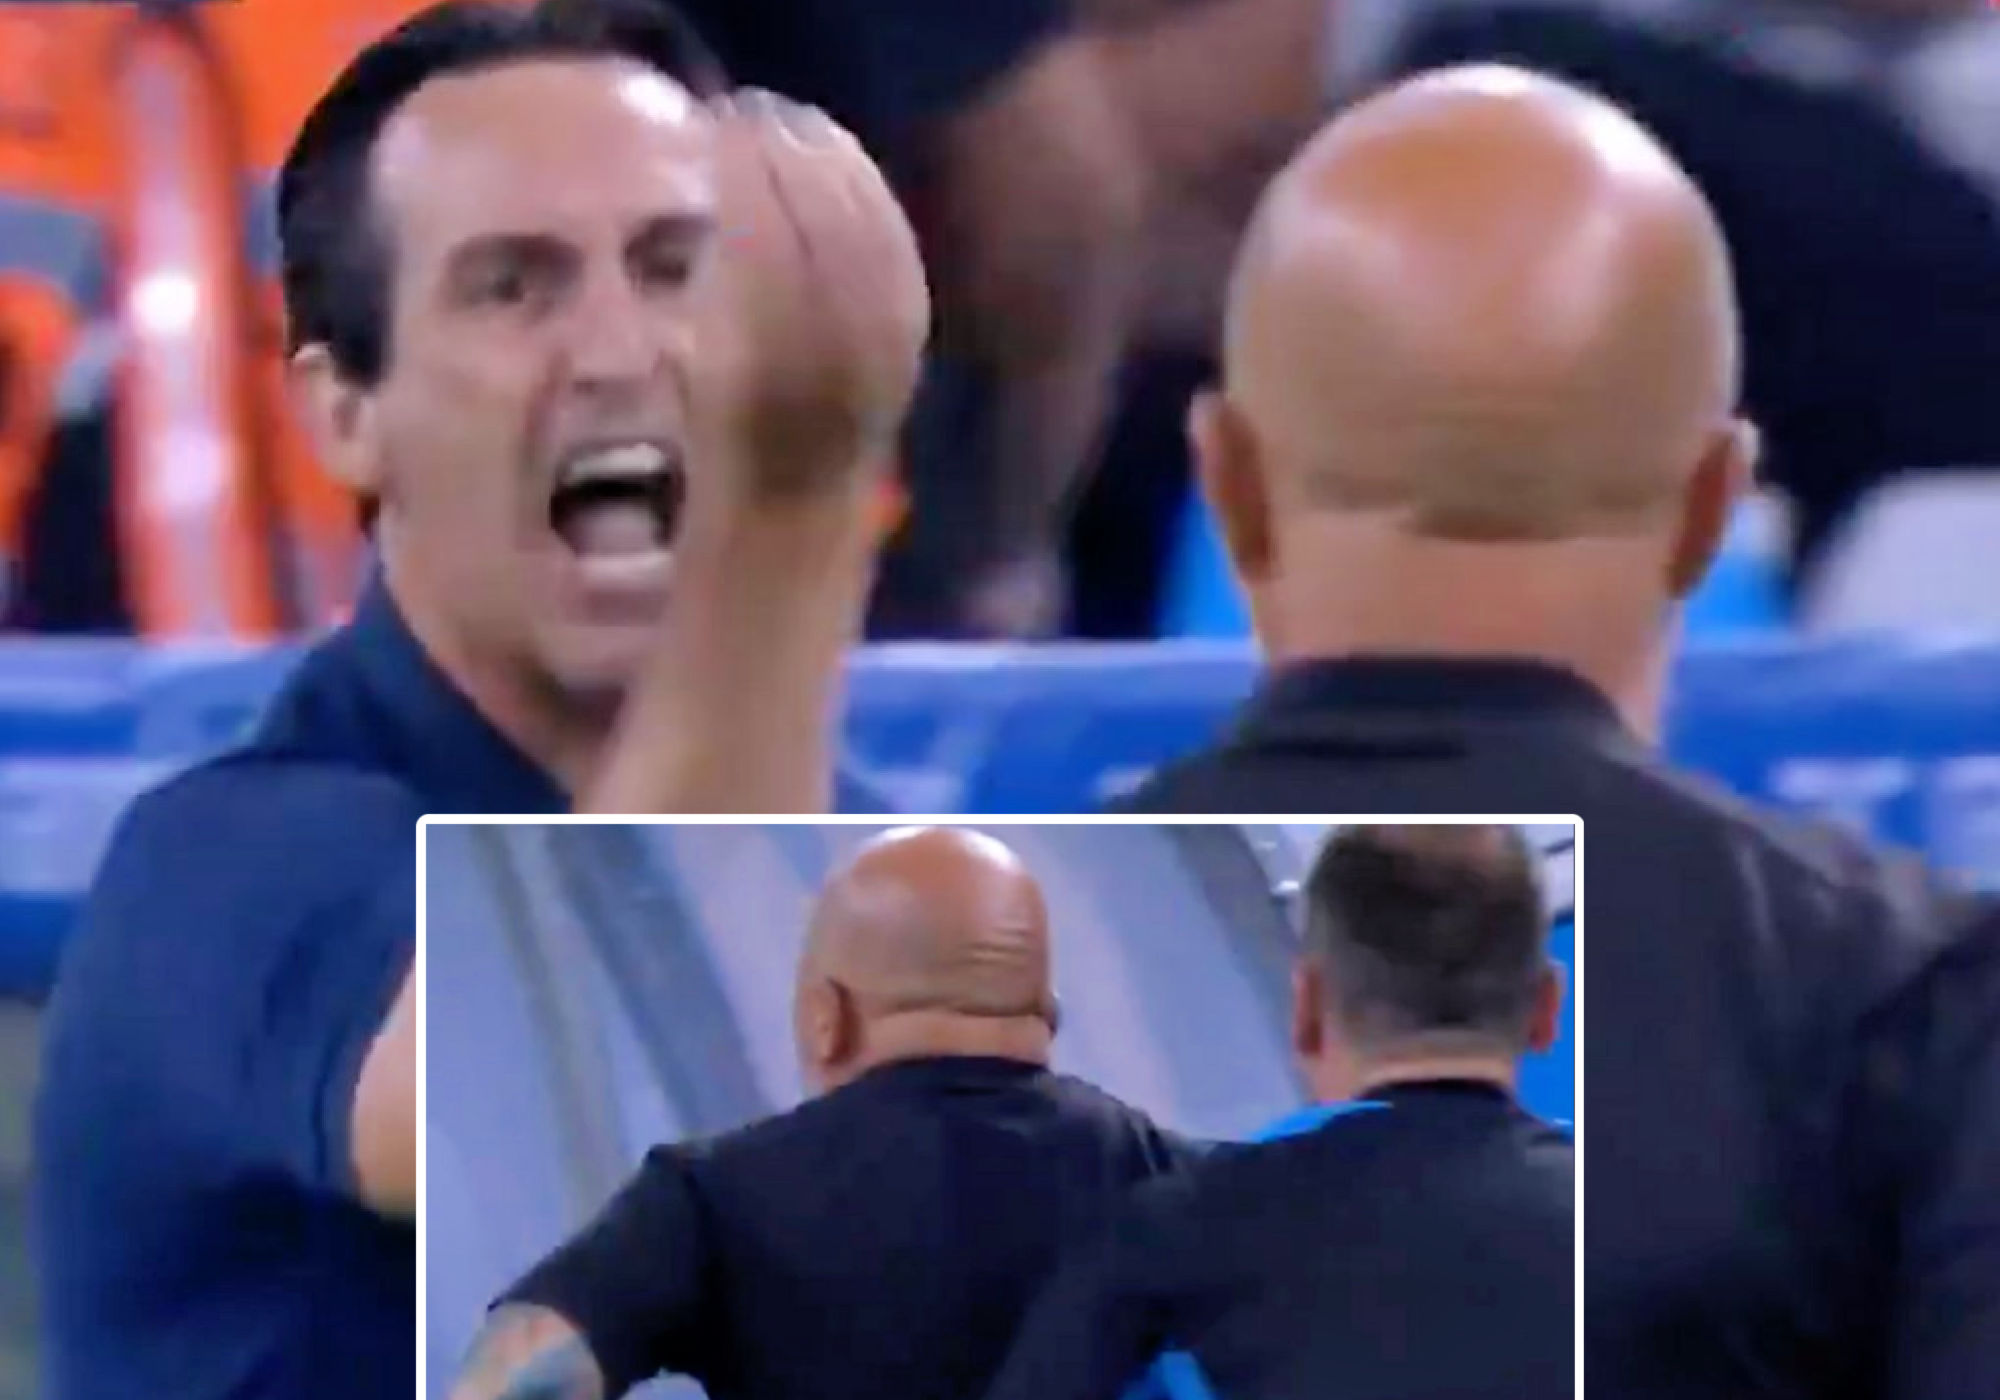 Watch: Emery tells  Sampaoli to ‘eat sh*t’ during heated touchline exchange